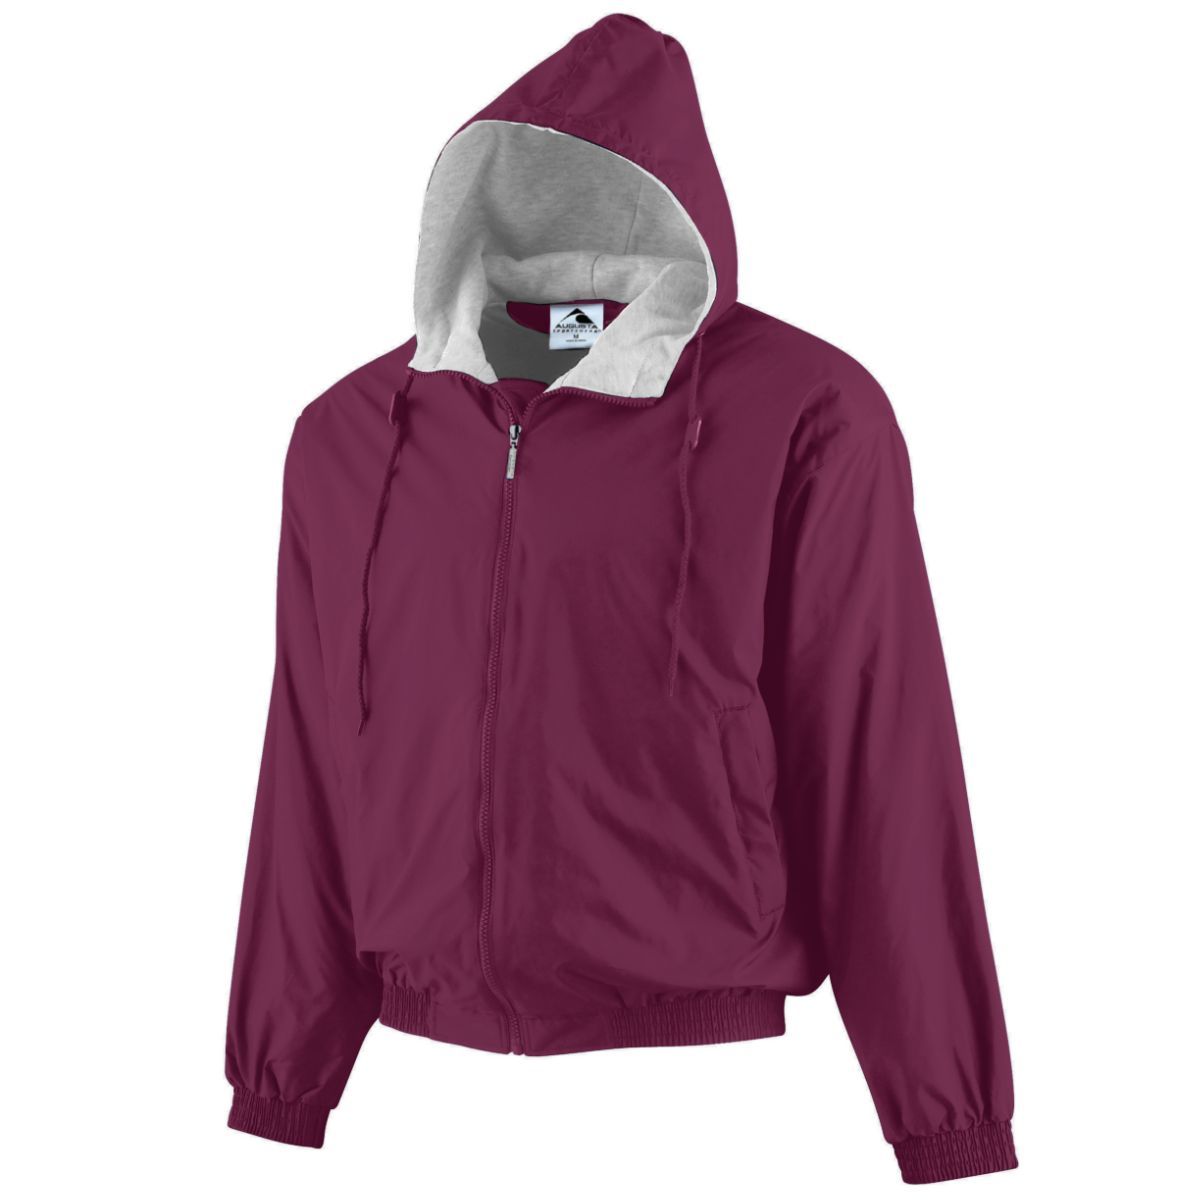 Augusta Sportswear Hooded Taffeta Jacket/Fleece Lined in Maroon  -Part of the Adult, Adult-Jacket, Augusta-Products, Outerwear product lines at KanaleyCreations.com